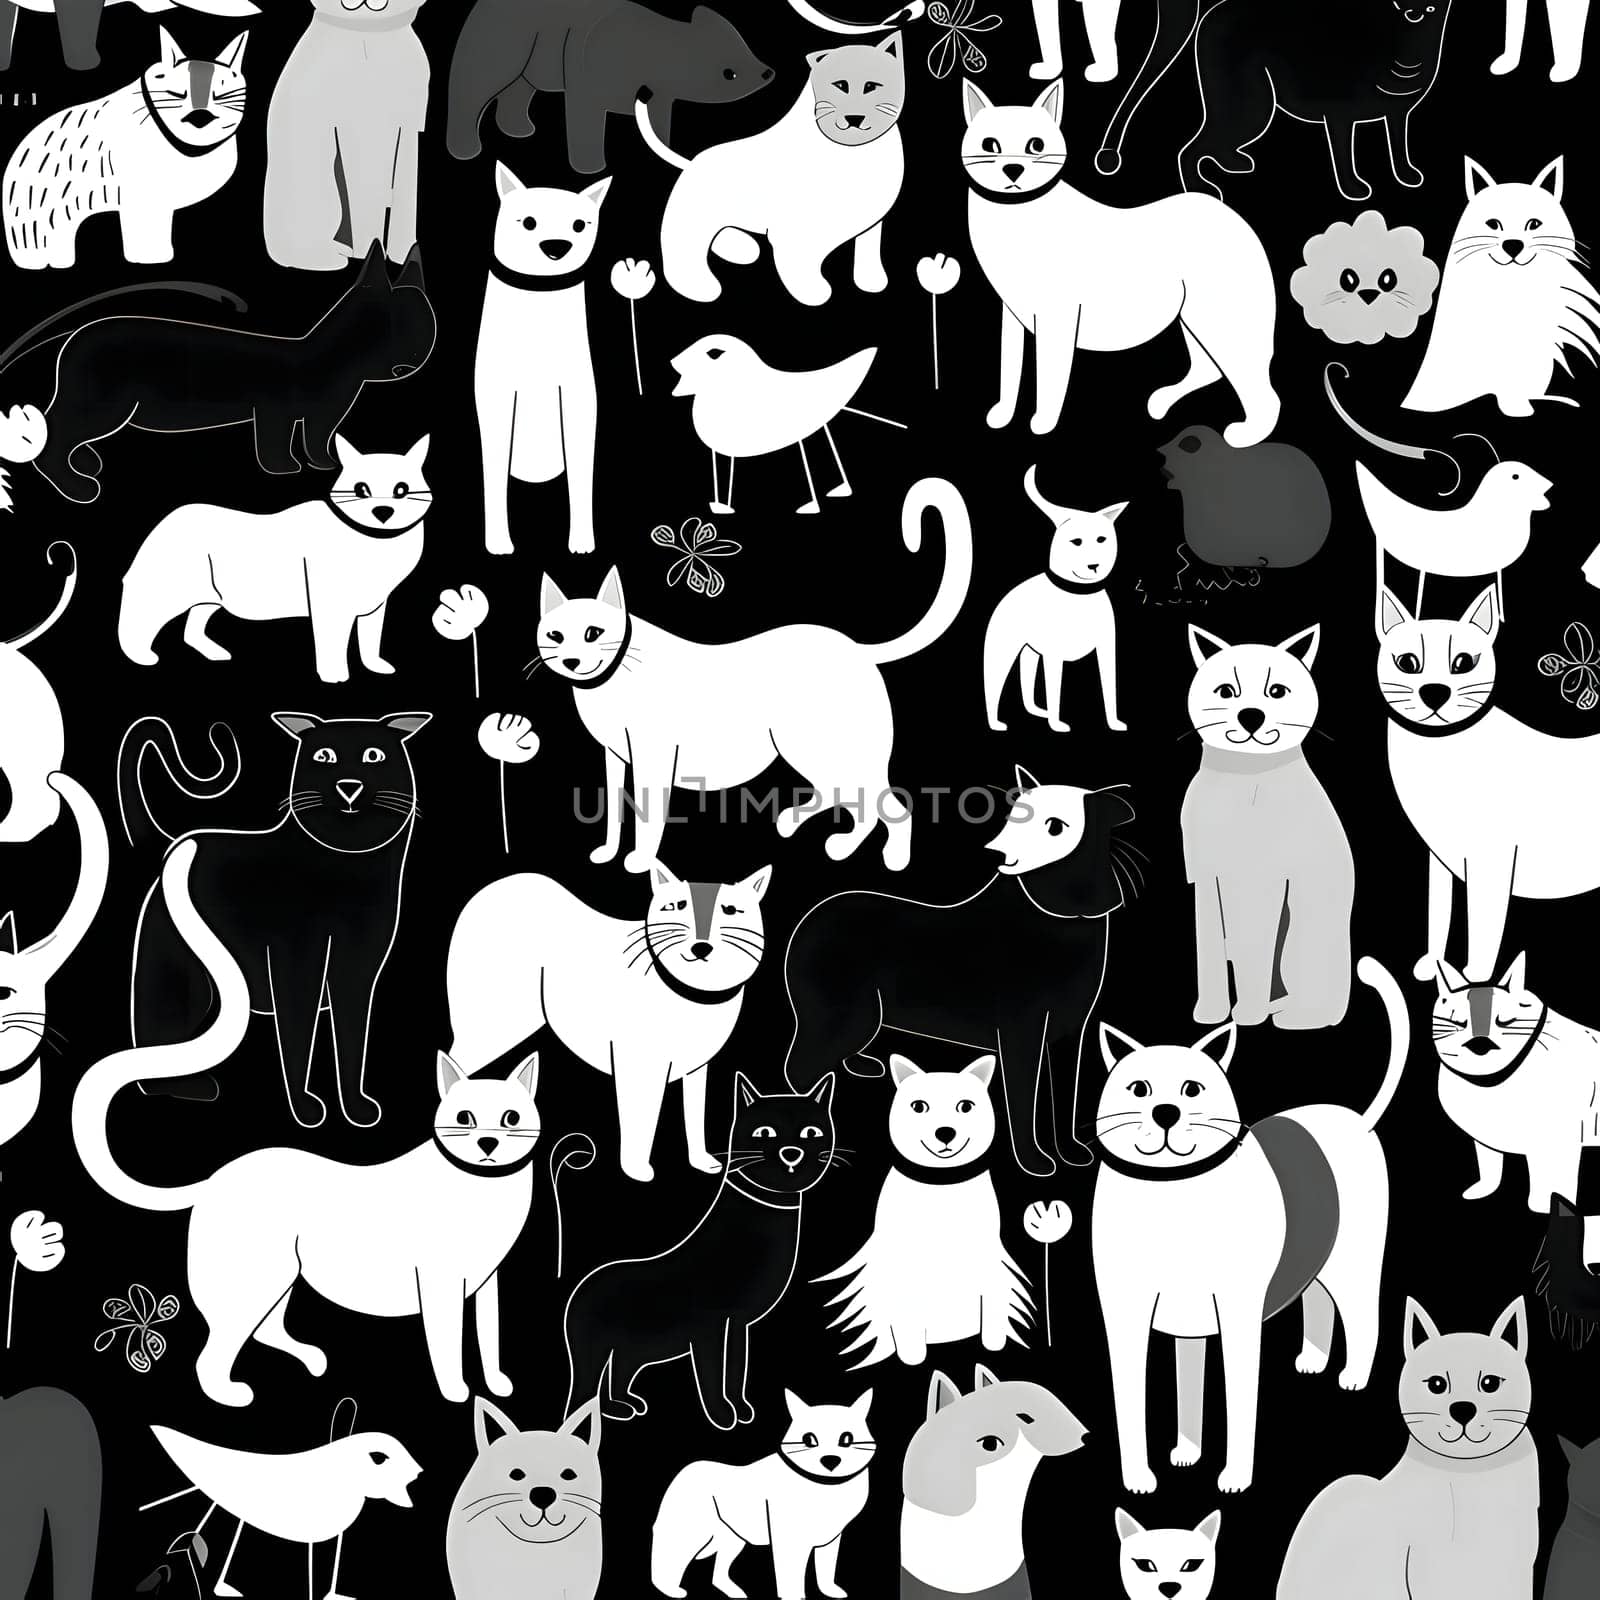 Patterns and banners backgrounds: Seamless pattern with cats and dogs on a black background.